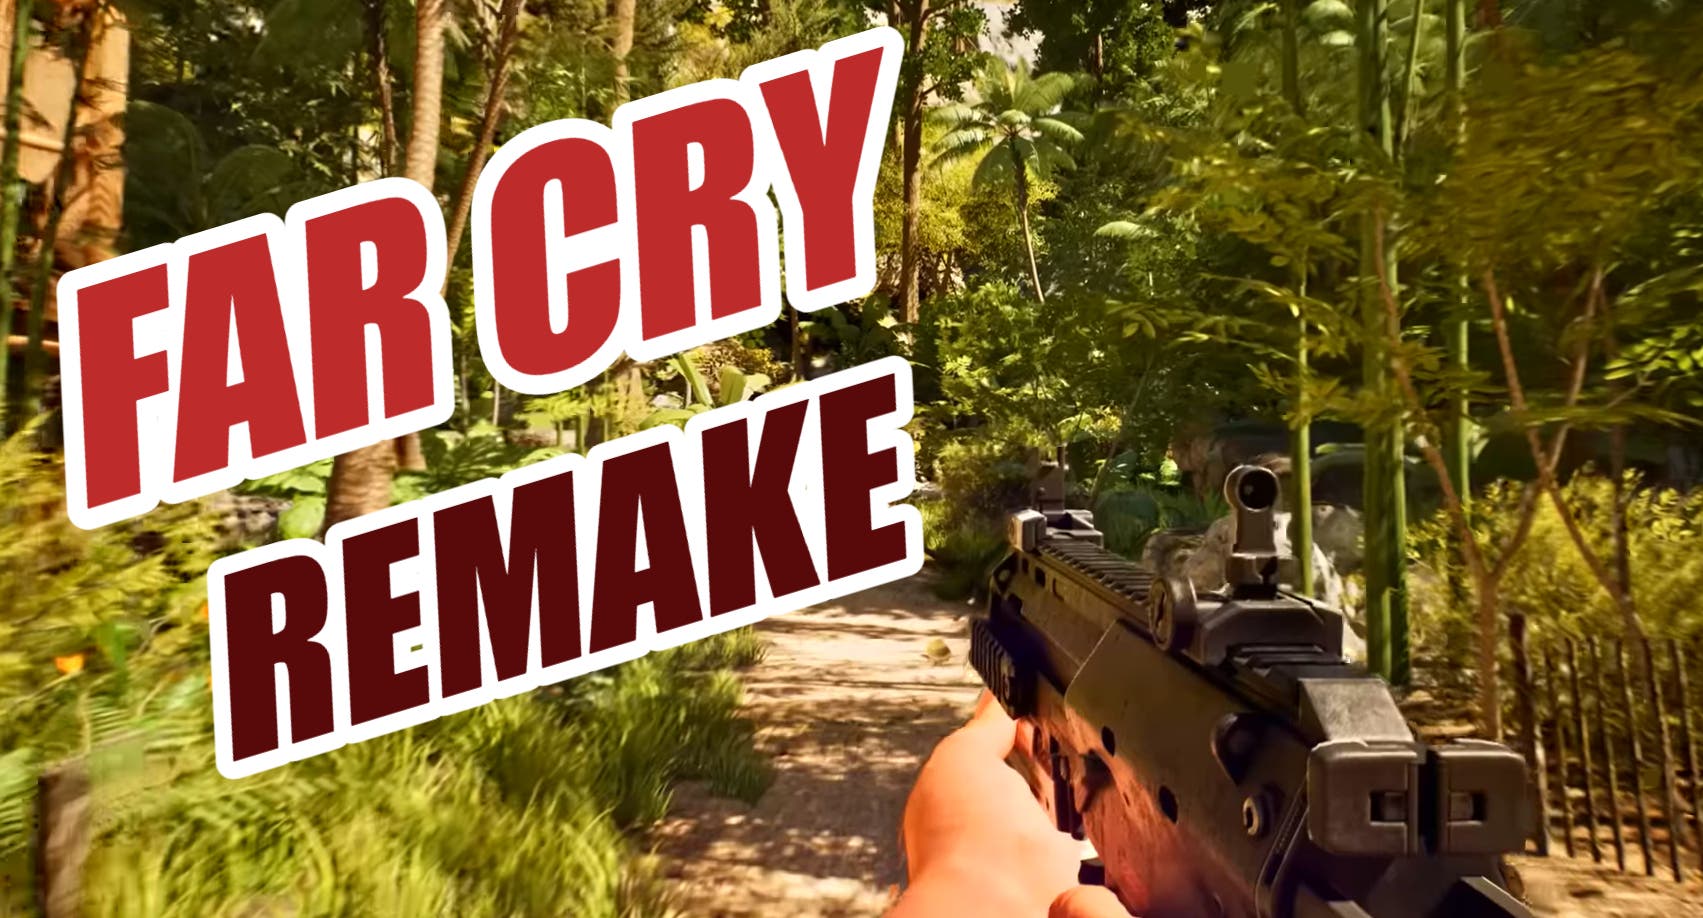 They imagine how Far Cry Remake would be made in Unreal Engine 5 and the result is spectacular